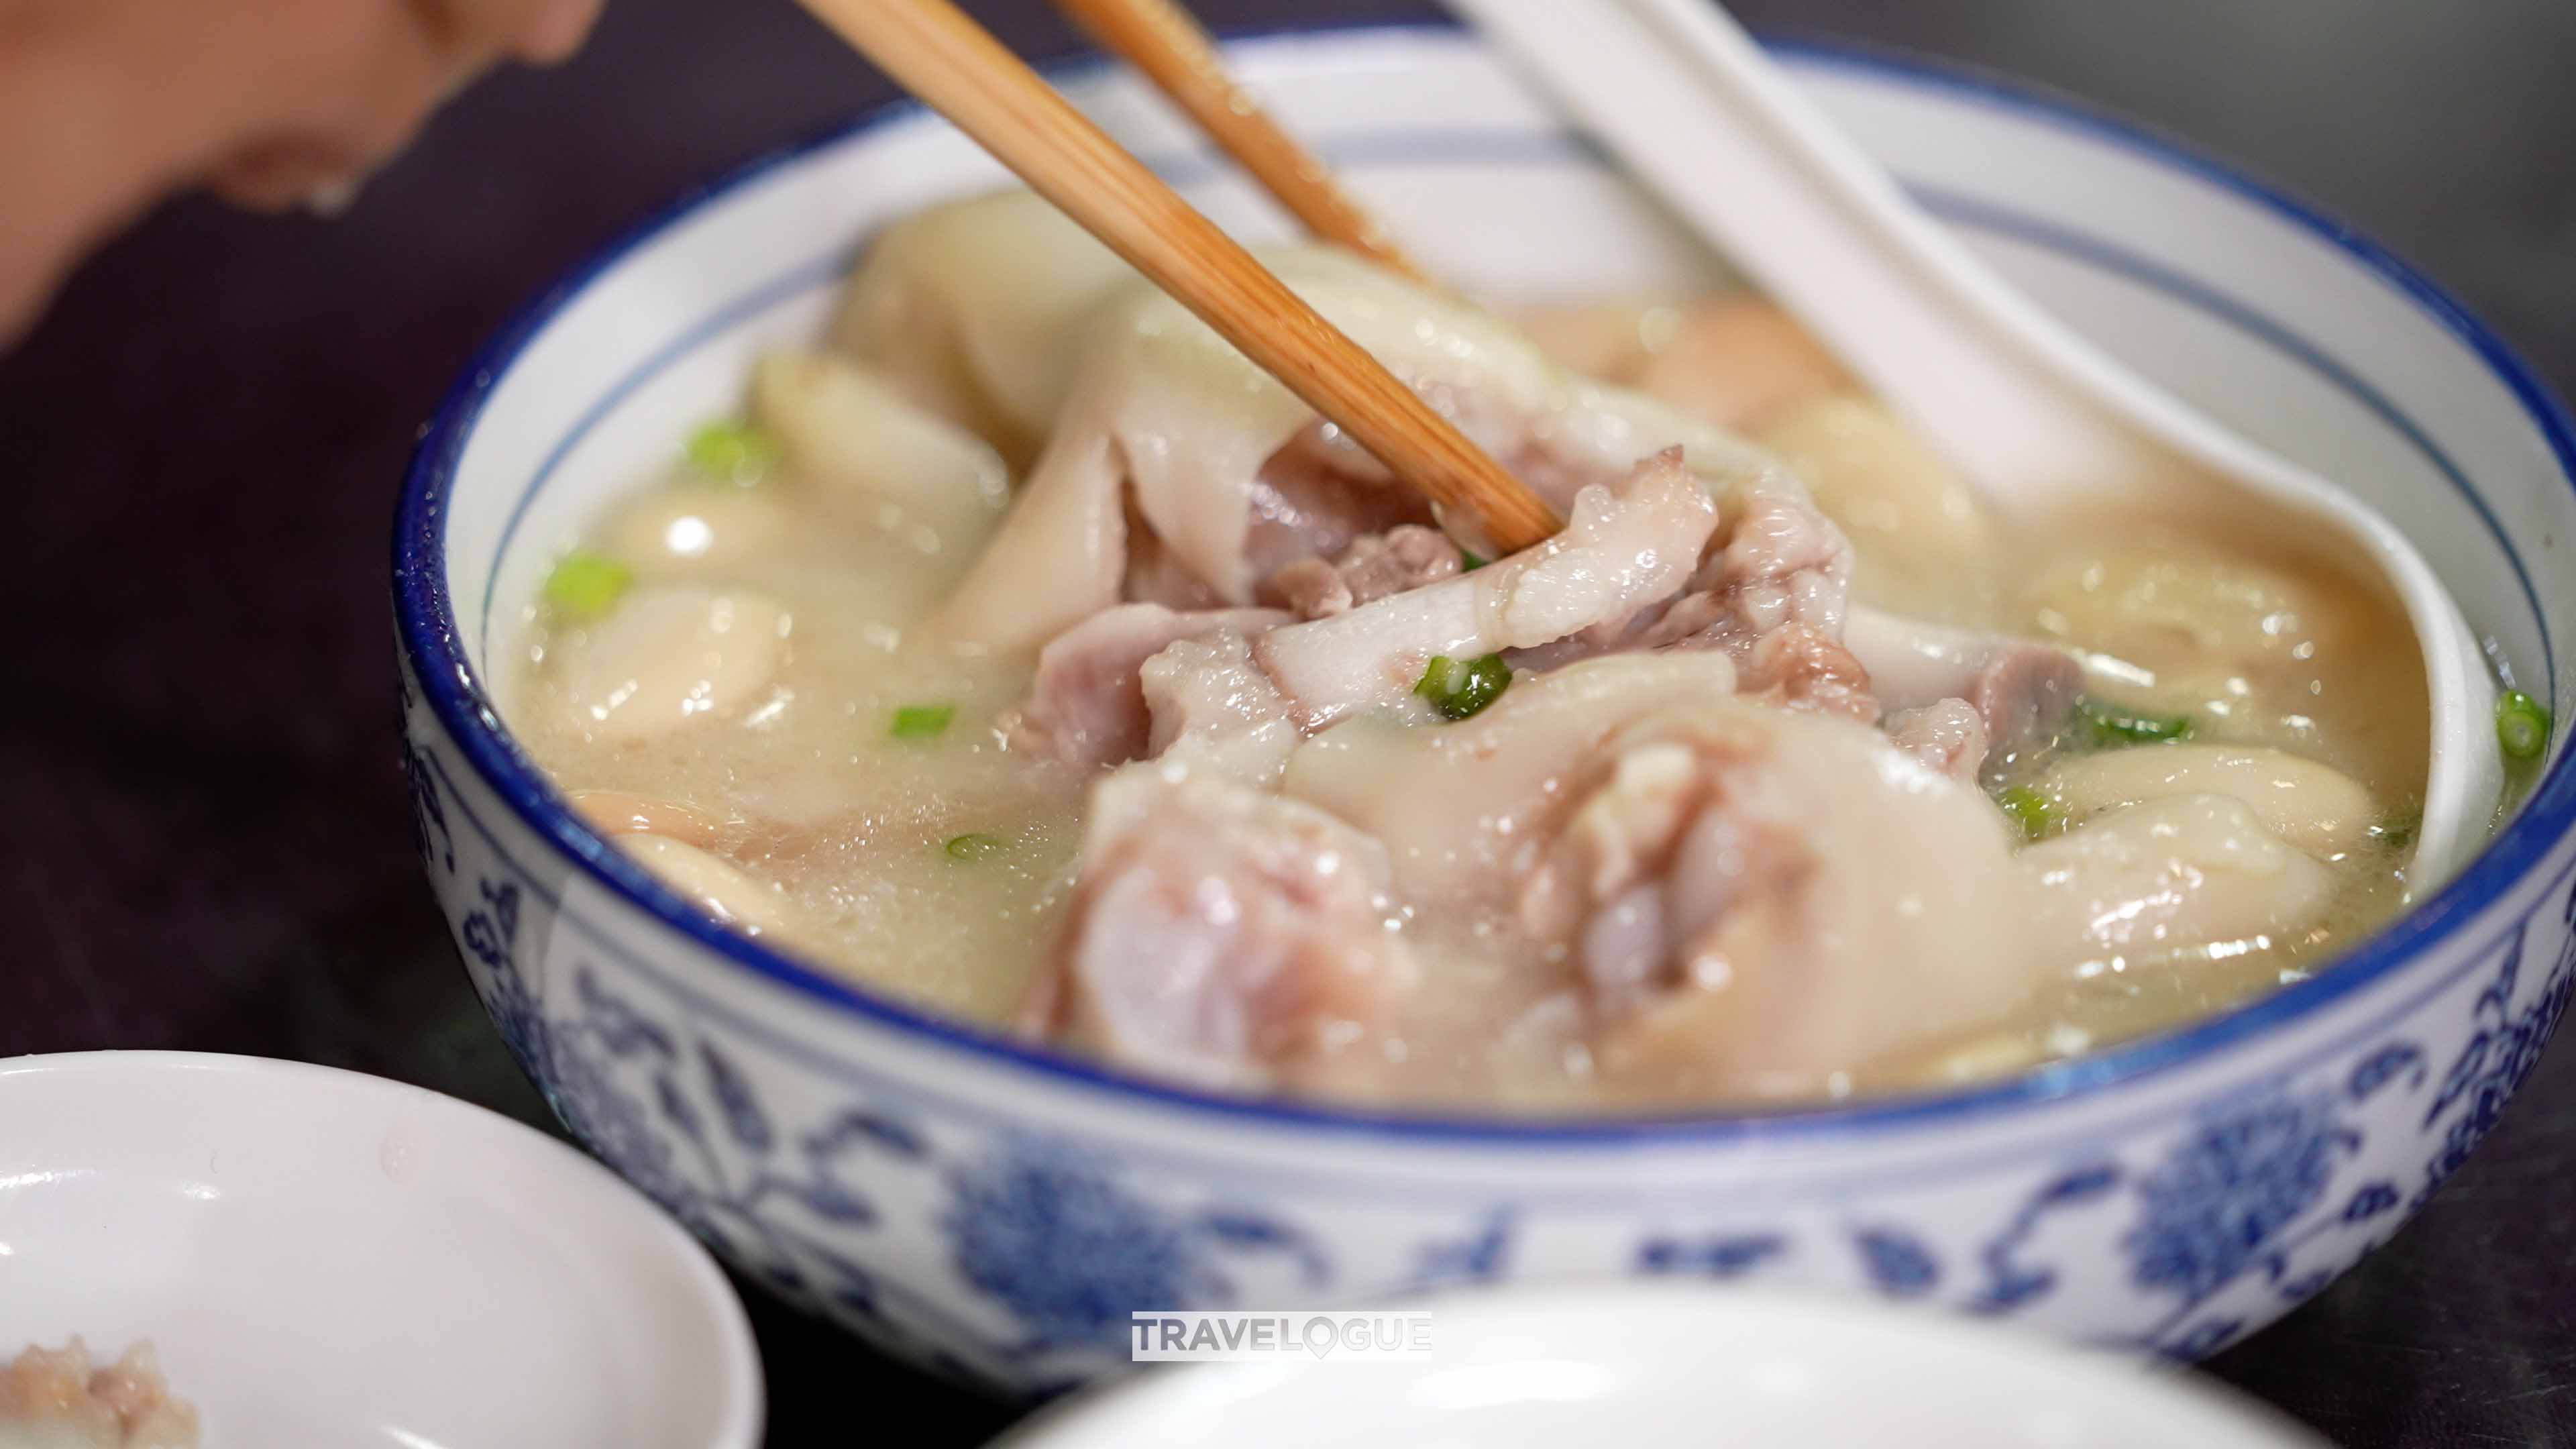 Boiled pig trotters are a popular dish in Chengdu, Sichuan Province. /CGTN